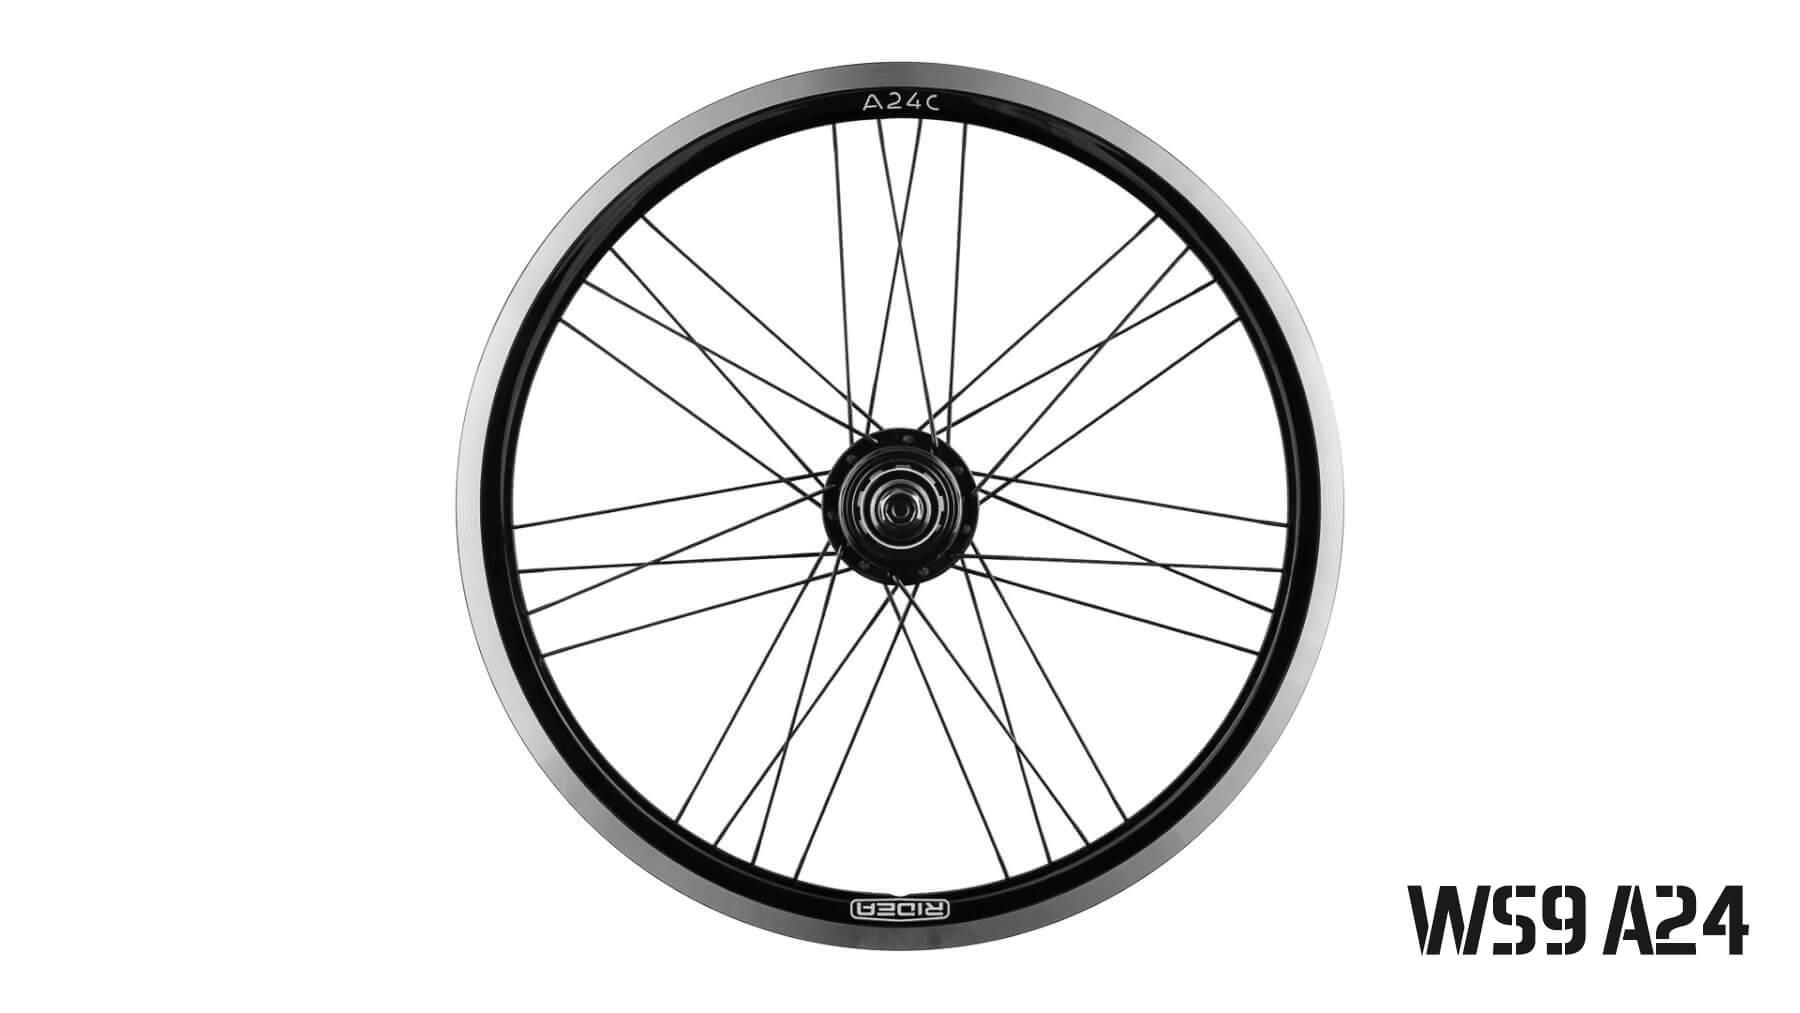 Alloy wheels for Brompton